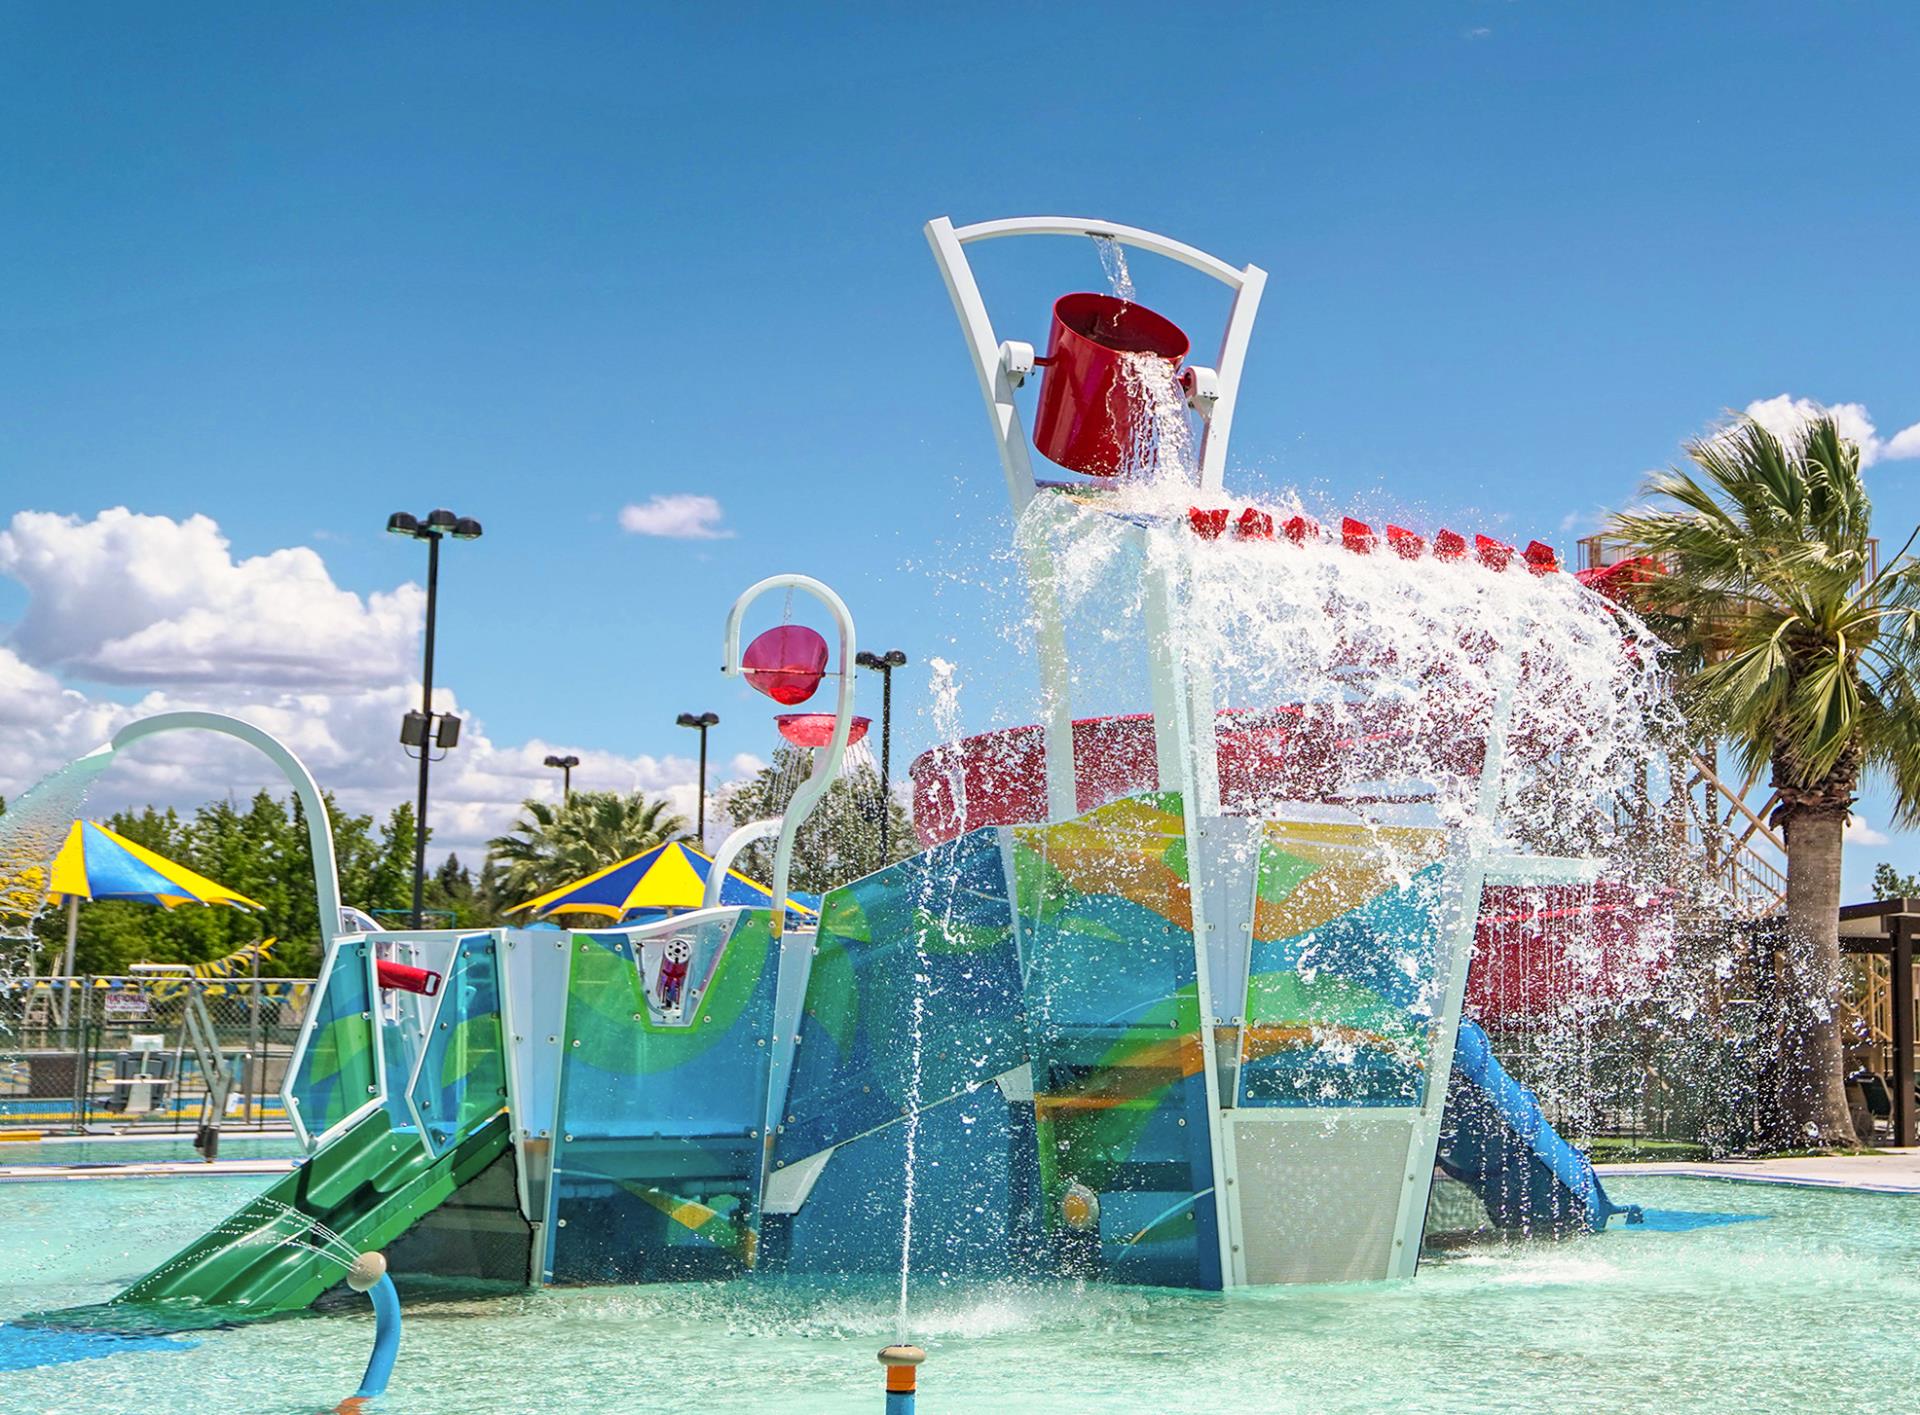 Photo of Steve Miklos Aquatic Center Play Structure with water features turned on, with a blue sky with clouds in the background